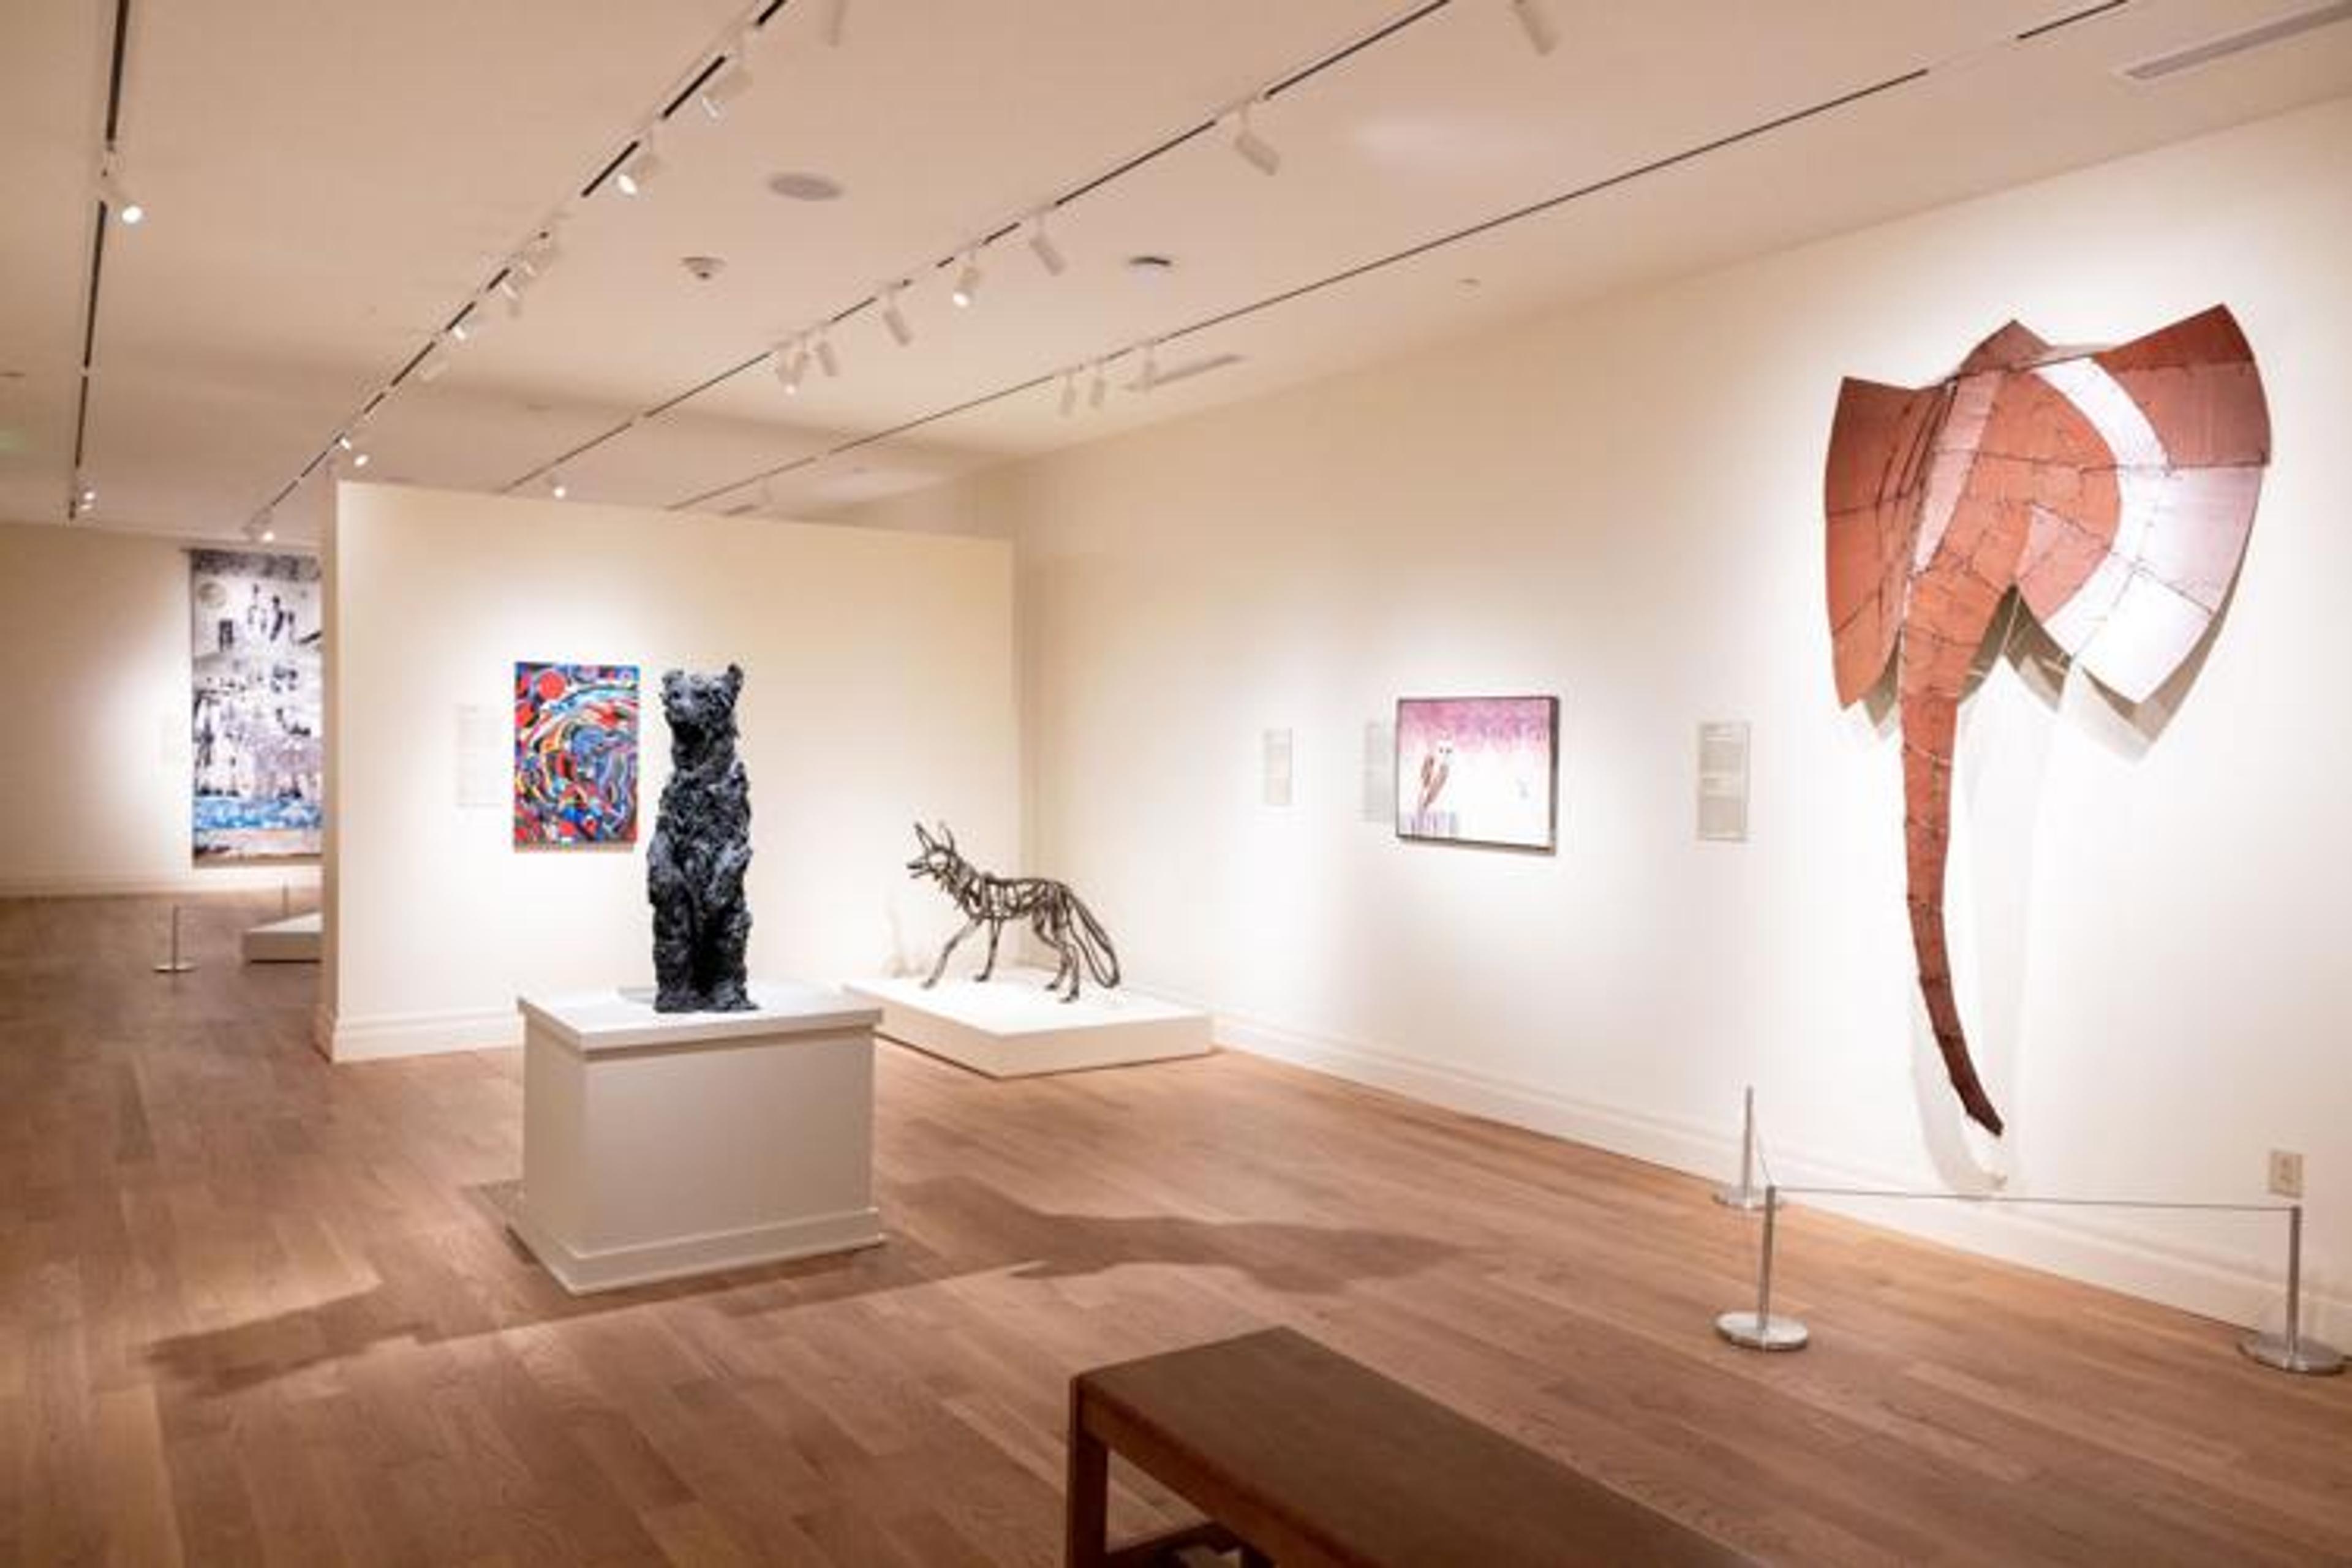 The National Museum of Wildlife Art’s exhibit “Un/Common Selections,” featuring some 50 works from its permanent collection, is on a nationwide tour that started this winter at the Gibbes Museum of Art in Charleston, South Carolina.